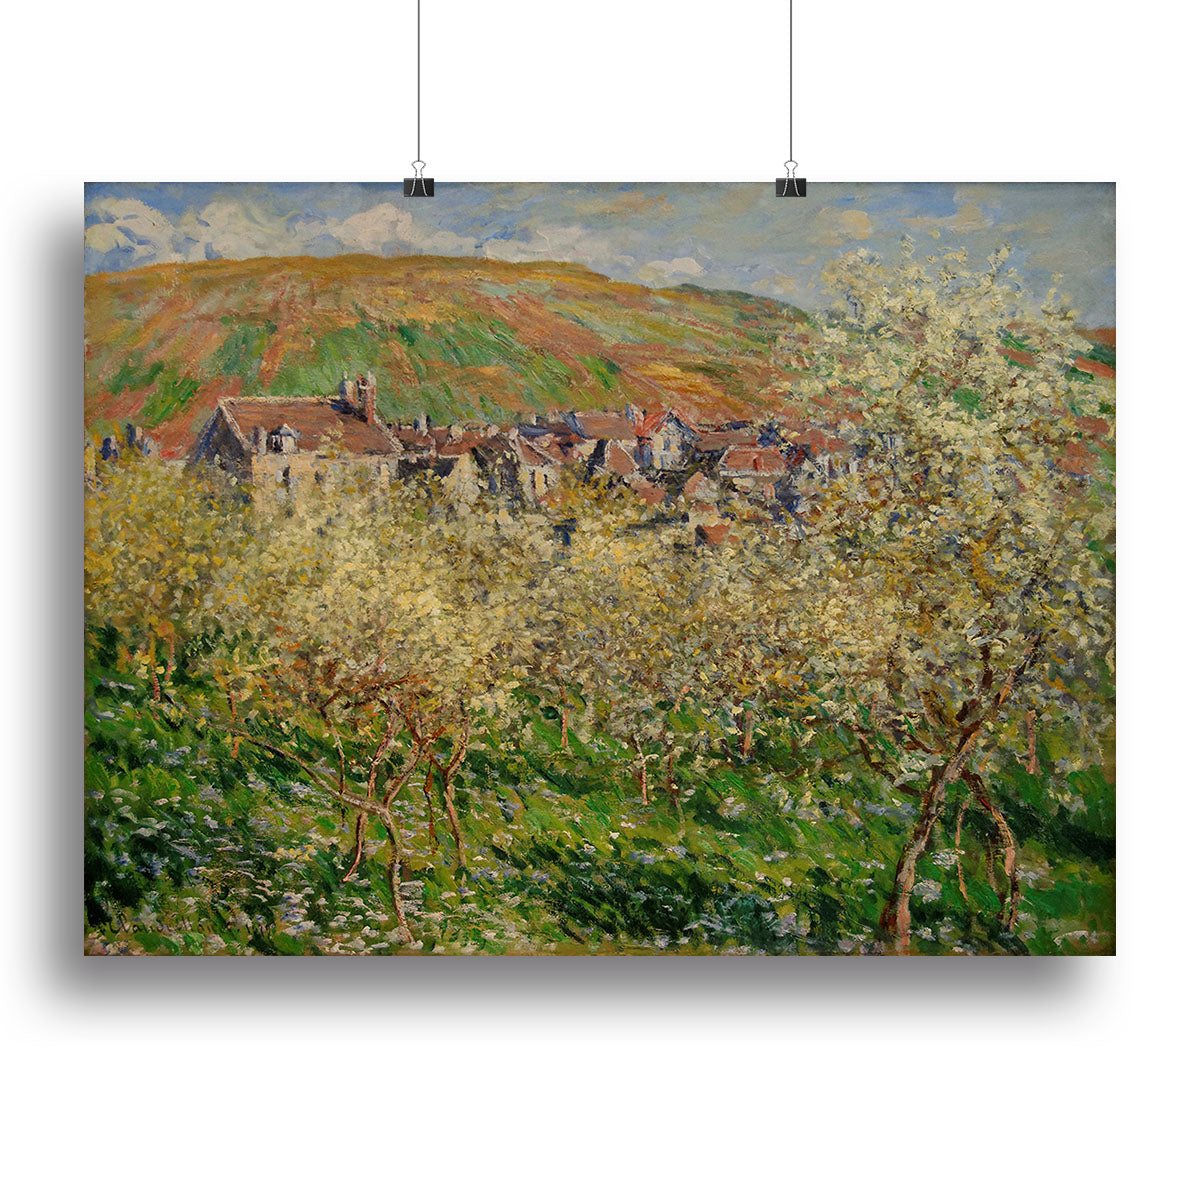 Plum trees in blossom by Monet Canvas Print or Poster - Canvas Art Rocks - 2